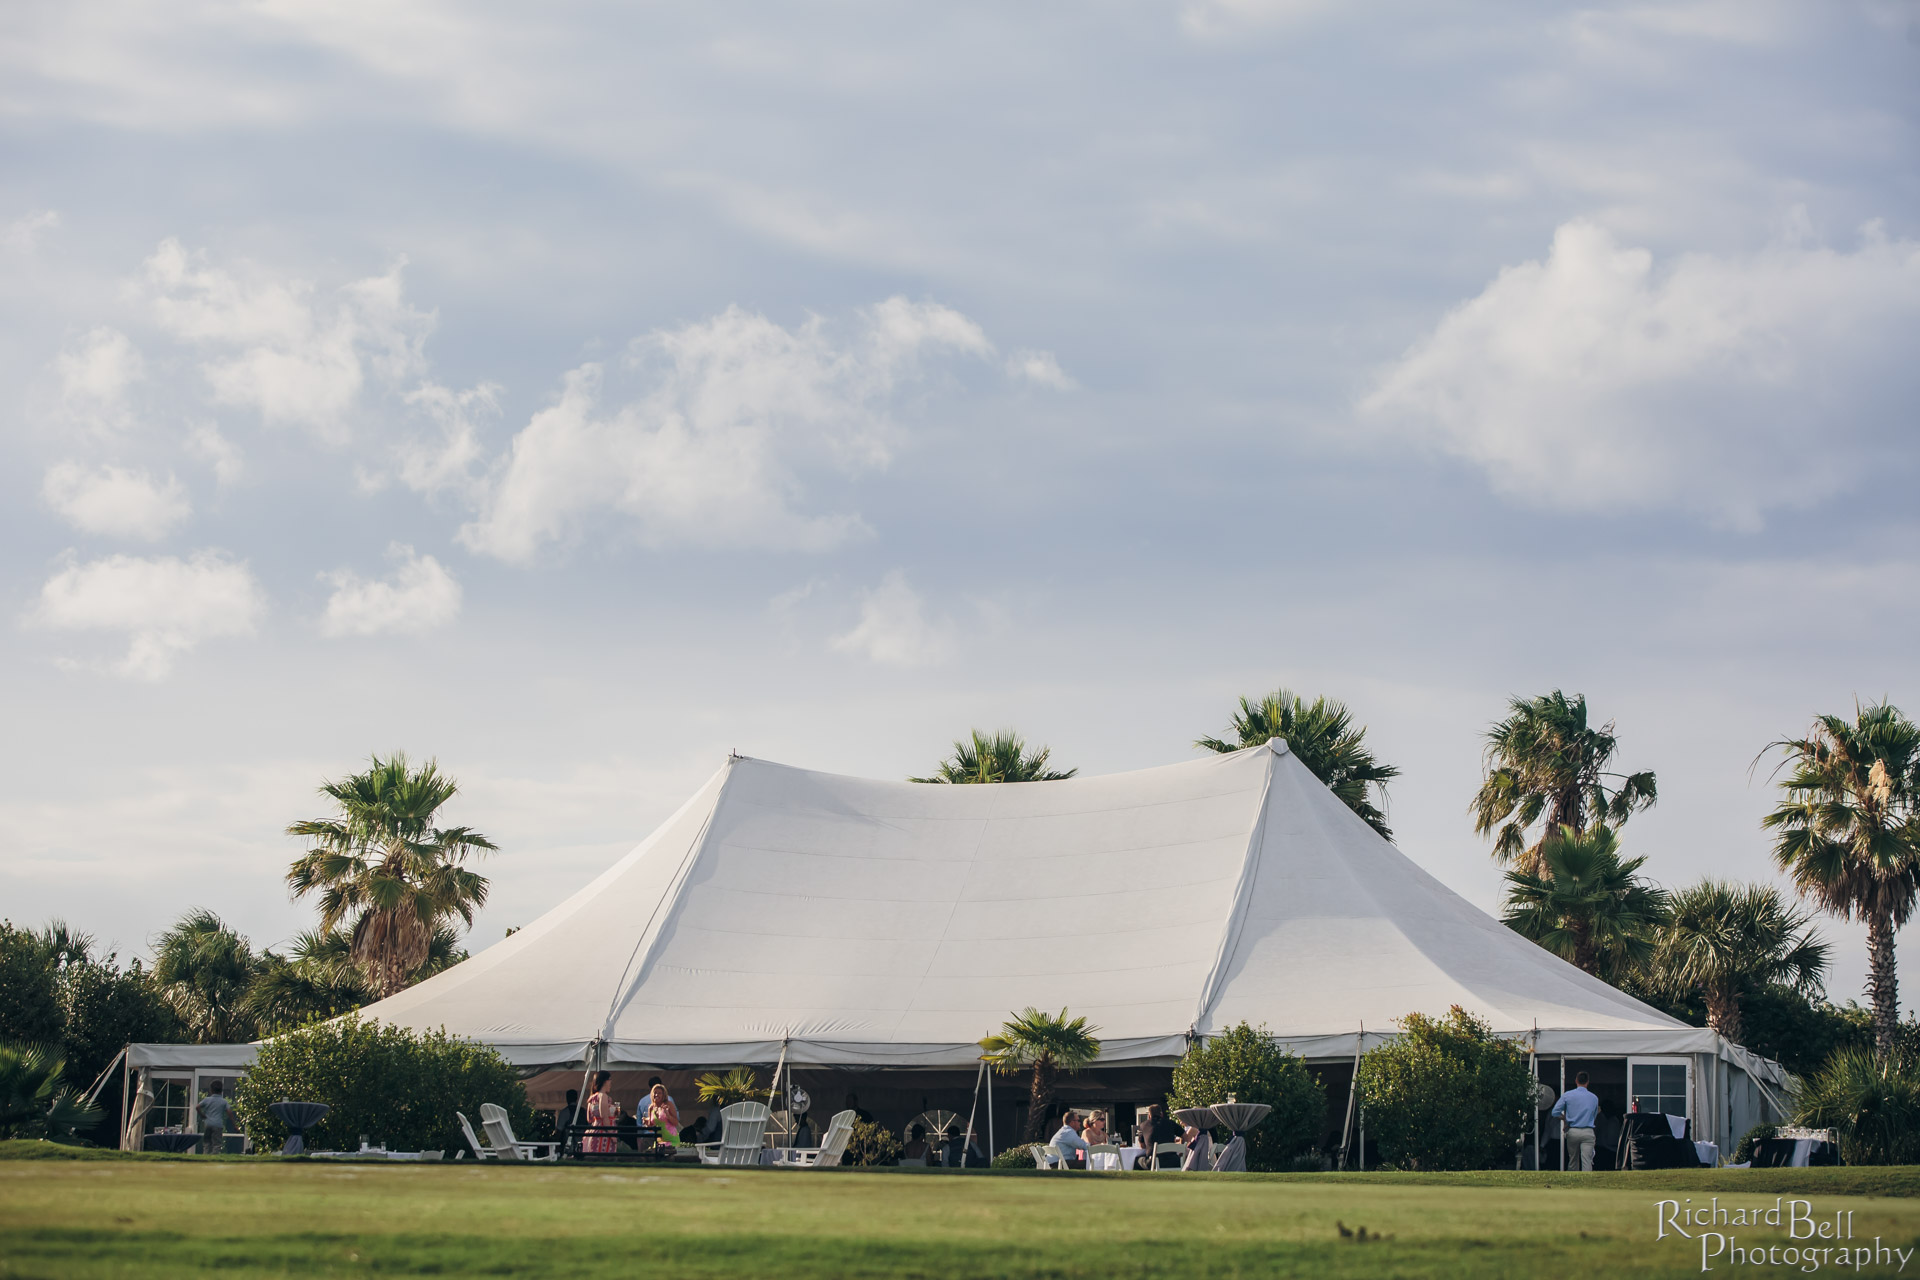 Preferred Charleston Caterer for the Pavilion at Patriots Point